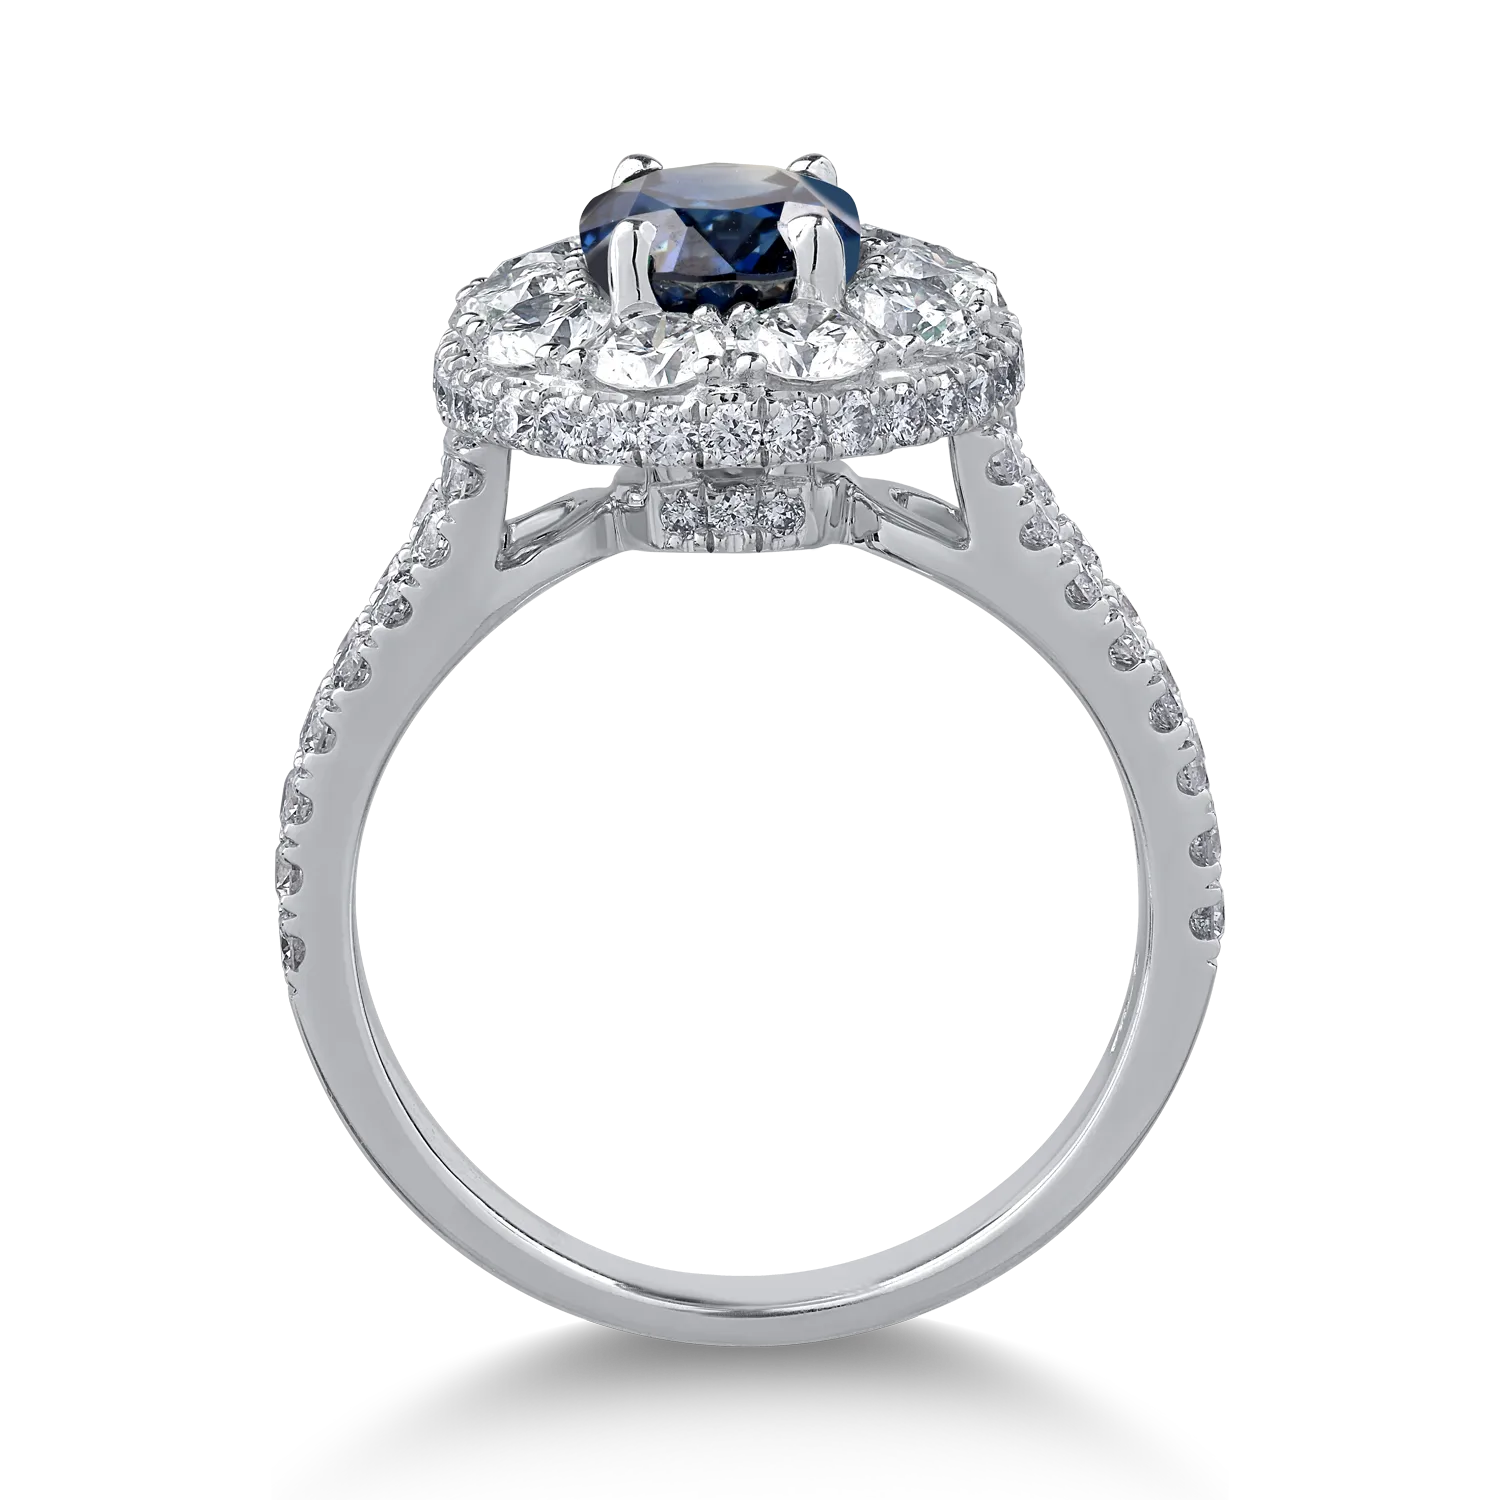 18K white gold ring with 1.85ct sapphire and 1.8ct diamonds